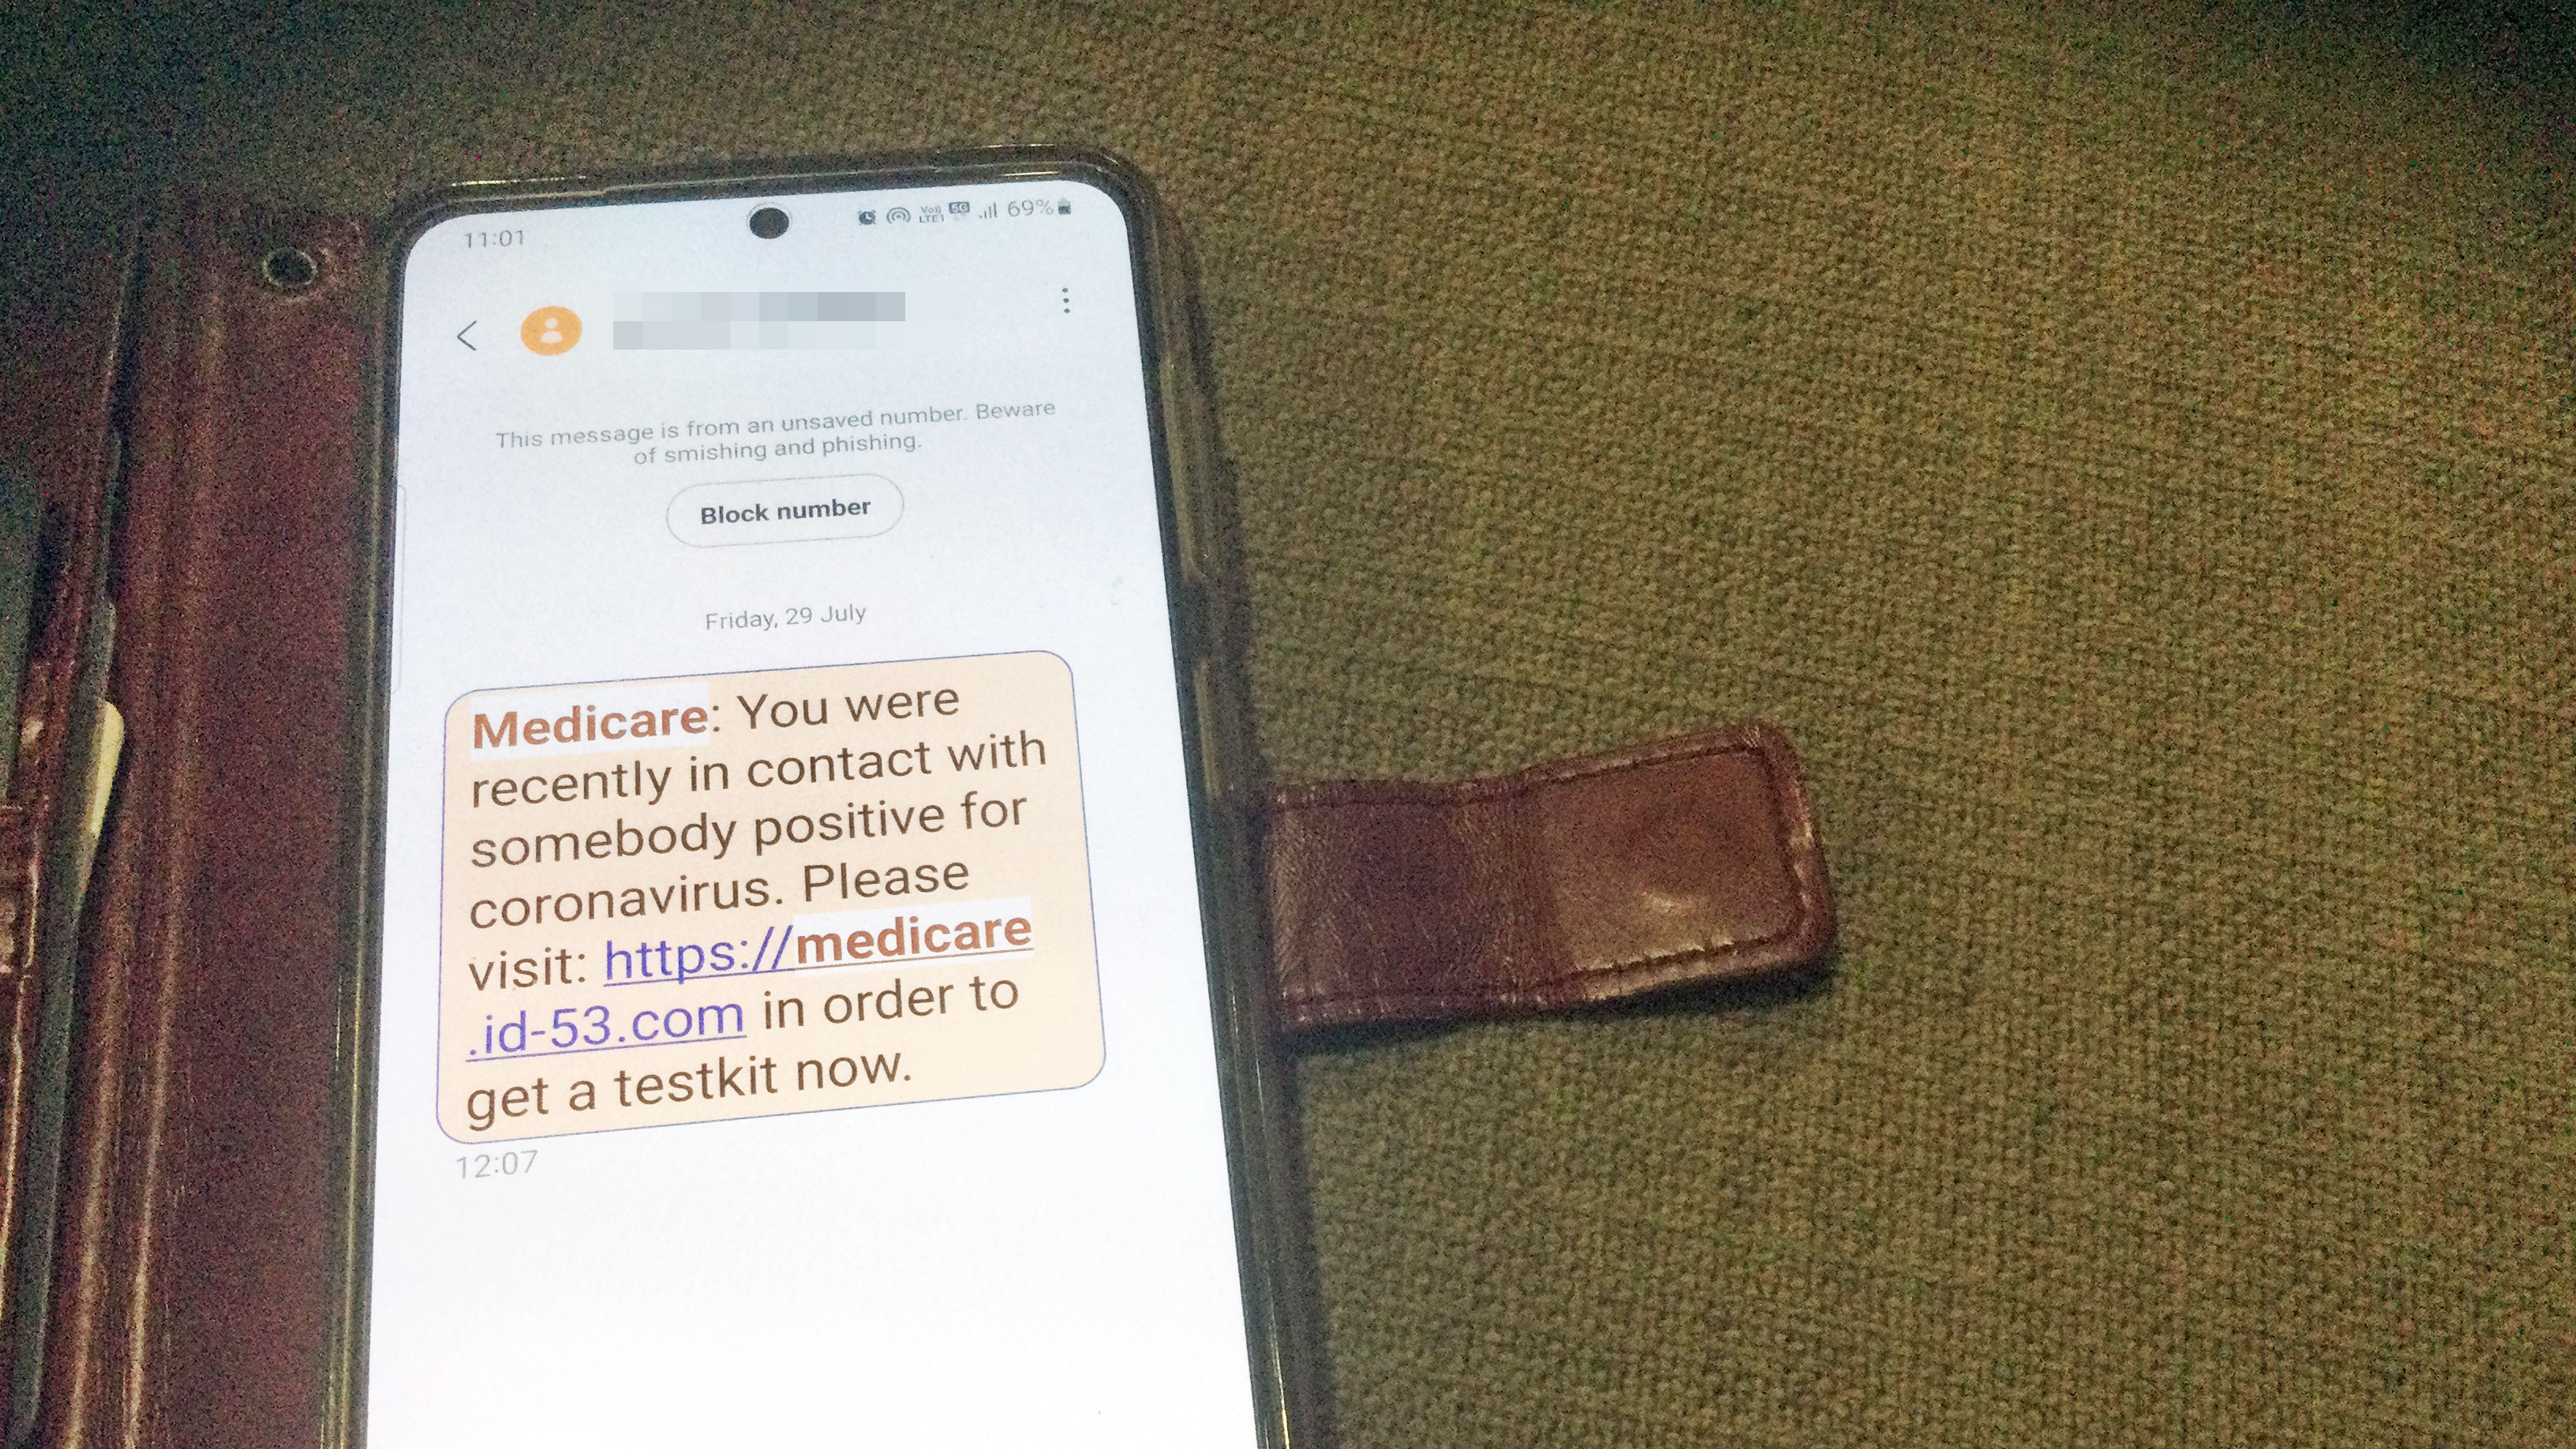 The text message Joanne Deans received purporting to be from Medicare.